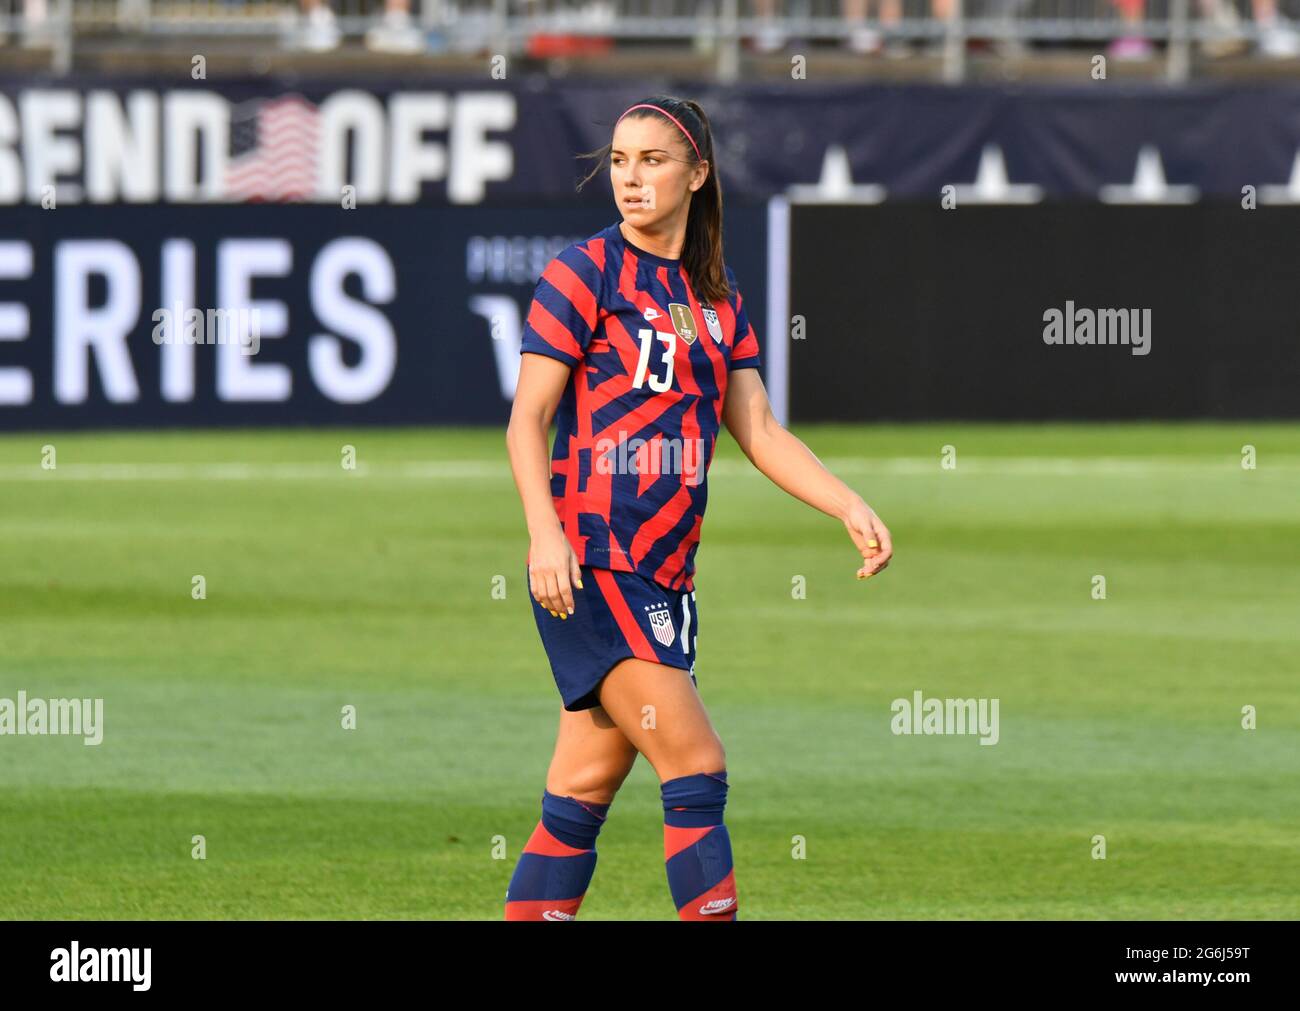 Connecticut, United States. 05/07/2021, Alex Morgan (13 USA) during the Send Off Series International Women's match between United States and Mexico at Pratt & Whitney Stadium at Rentschler in East Hartford, Connecticut. Credit: SPP Sport Press Photo. /Alamy Live News Stock Photo